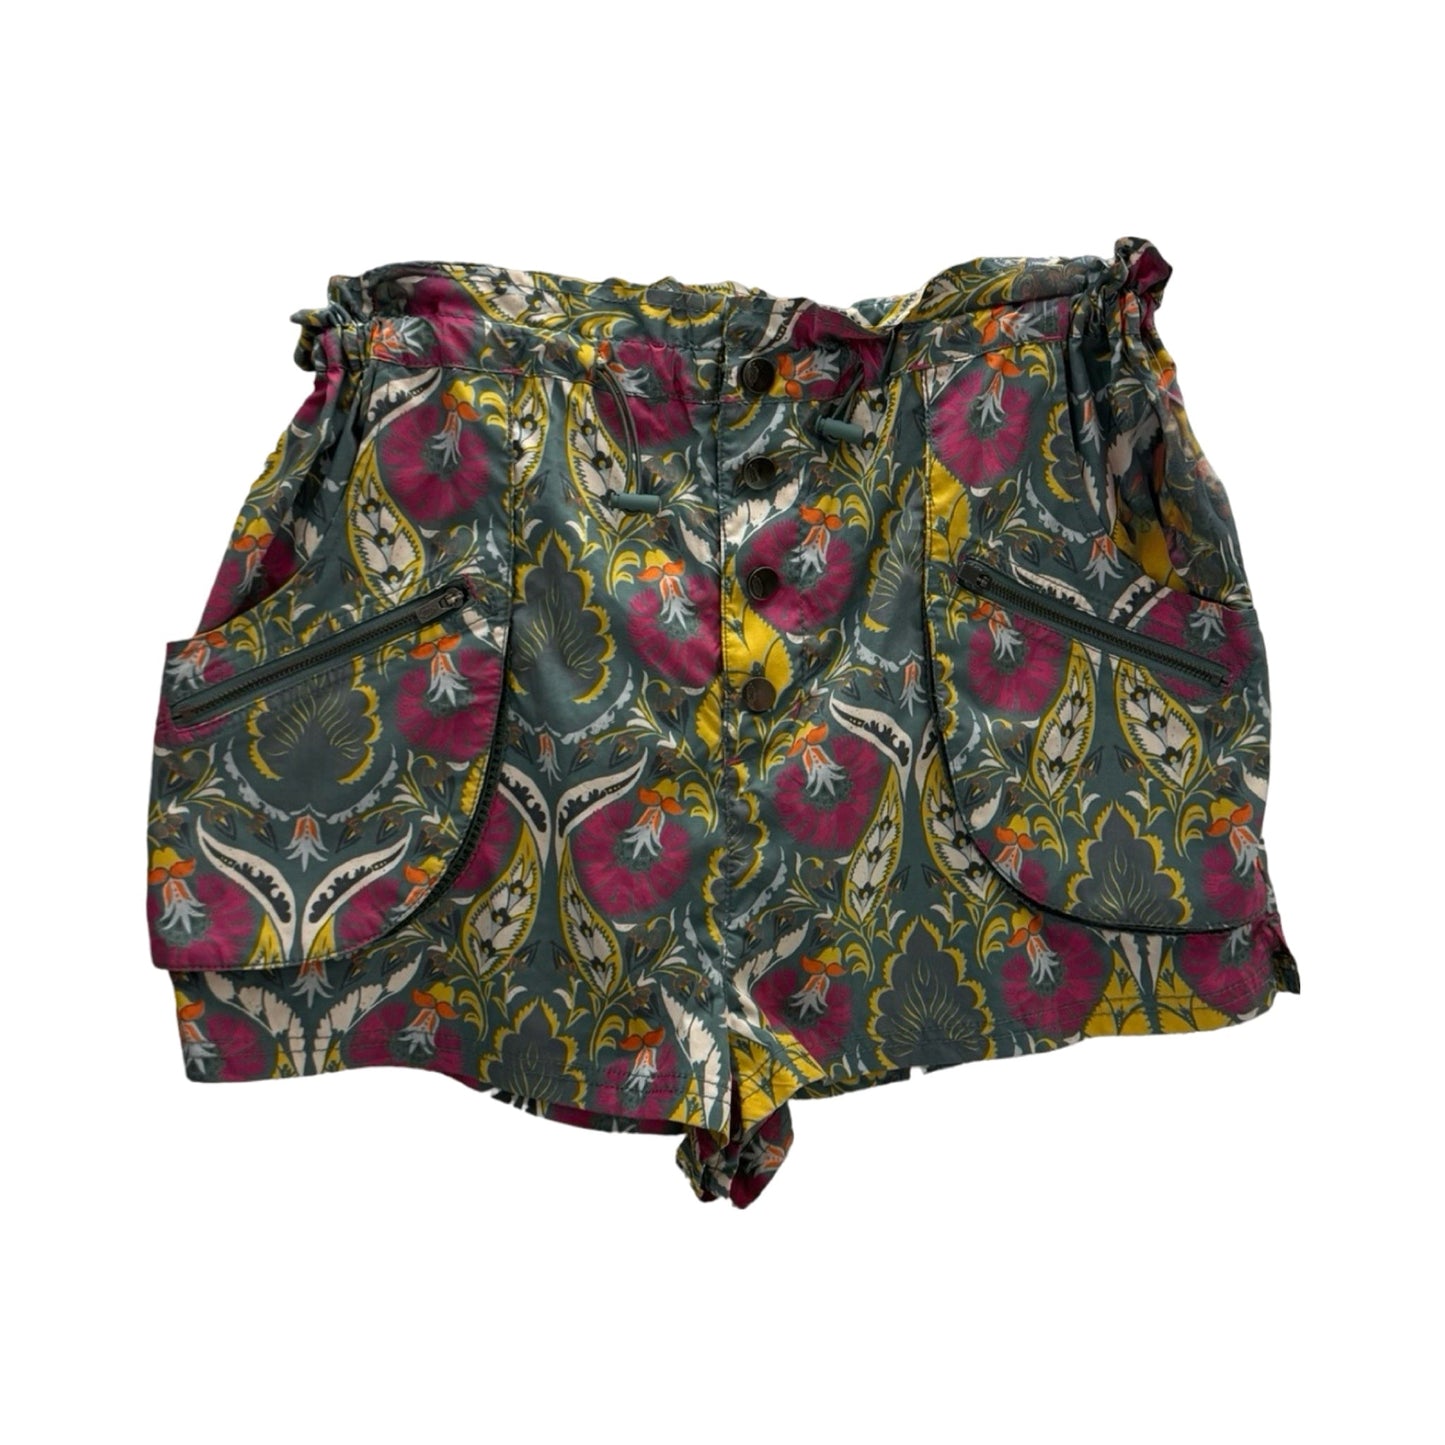 Multi-colored Shorts Free People, Size S